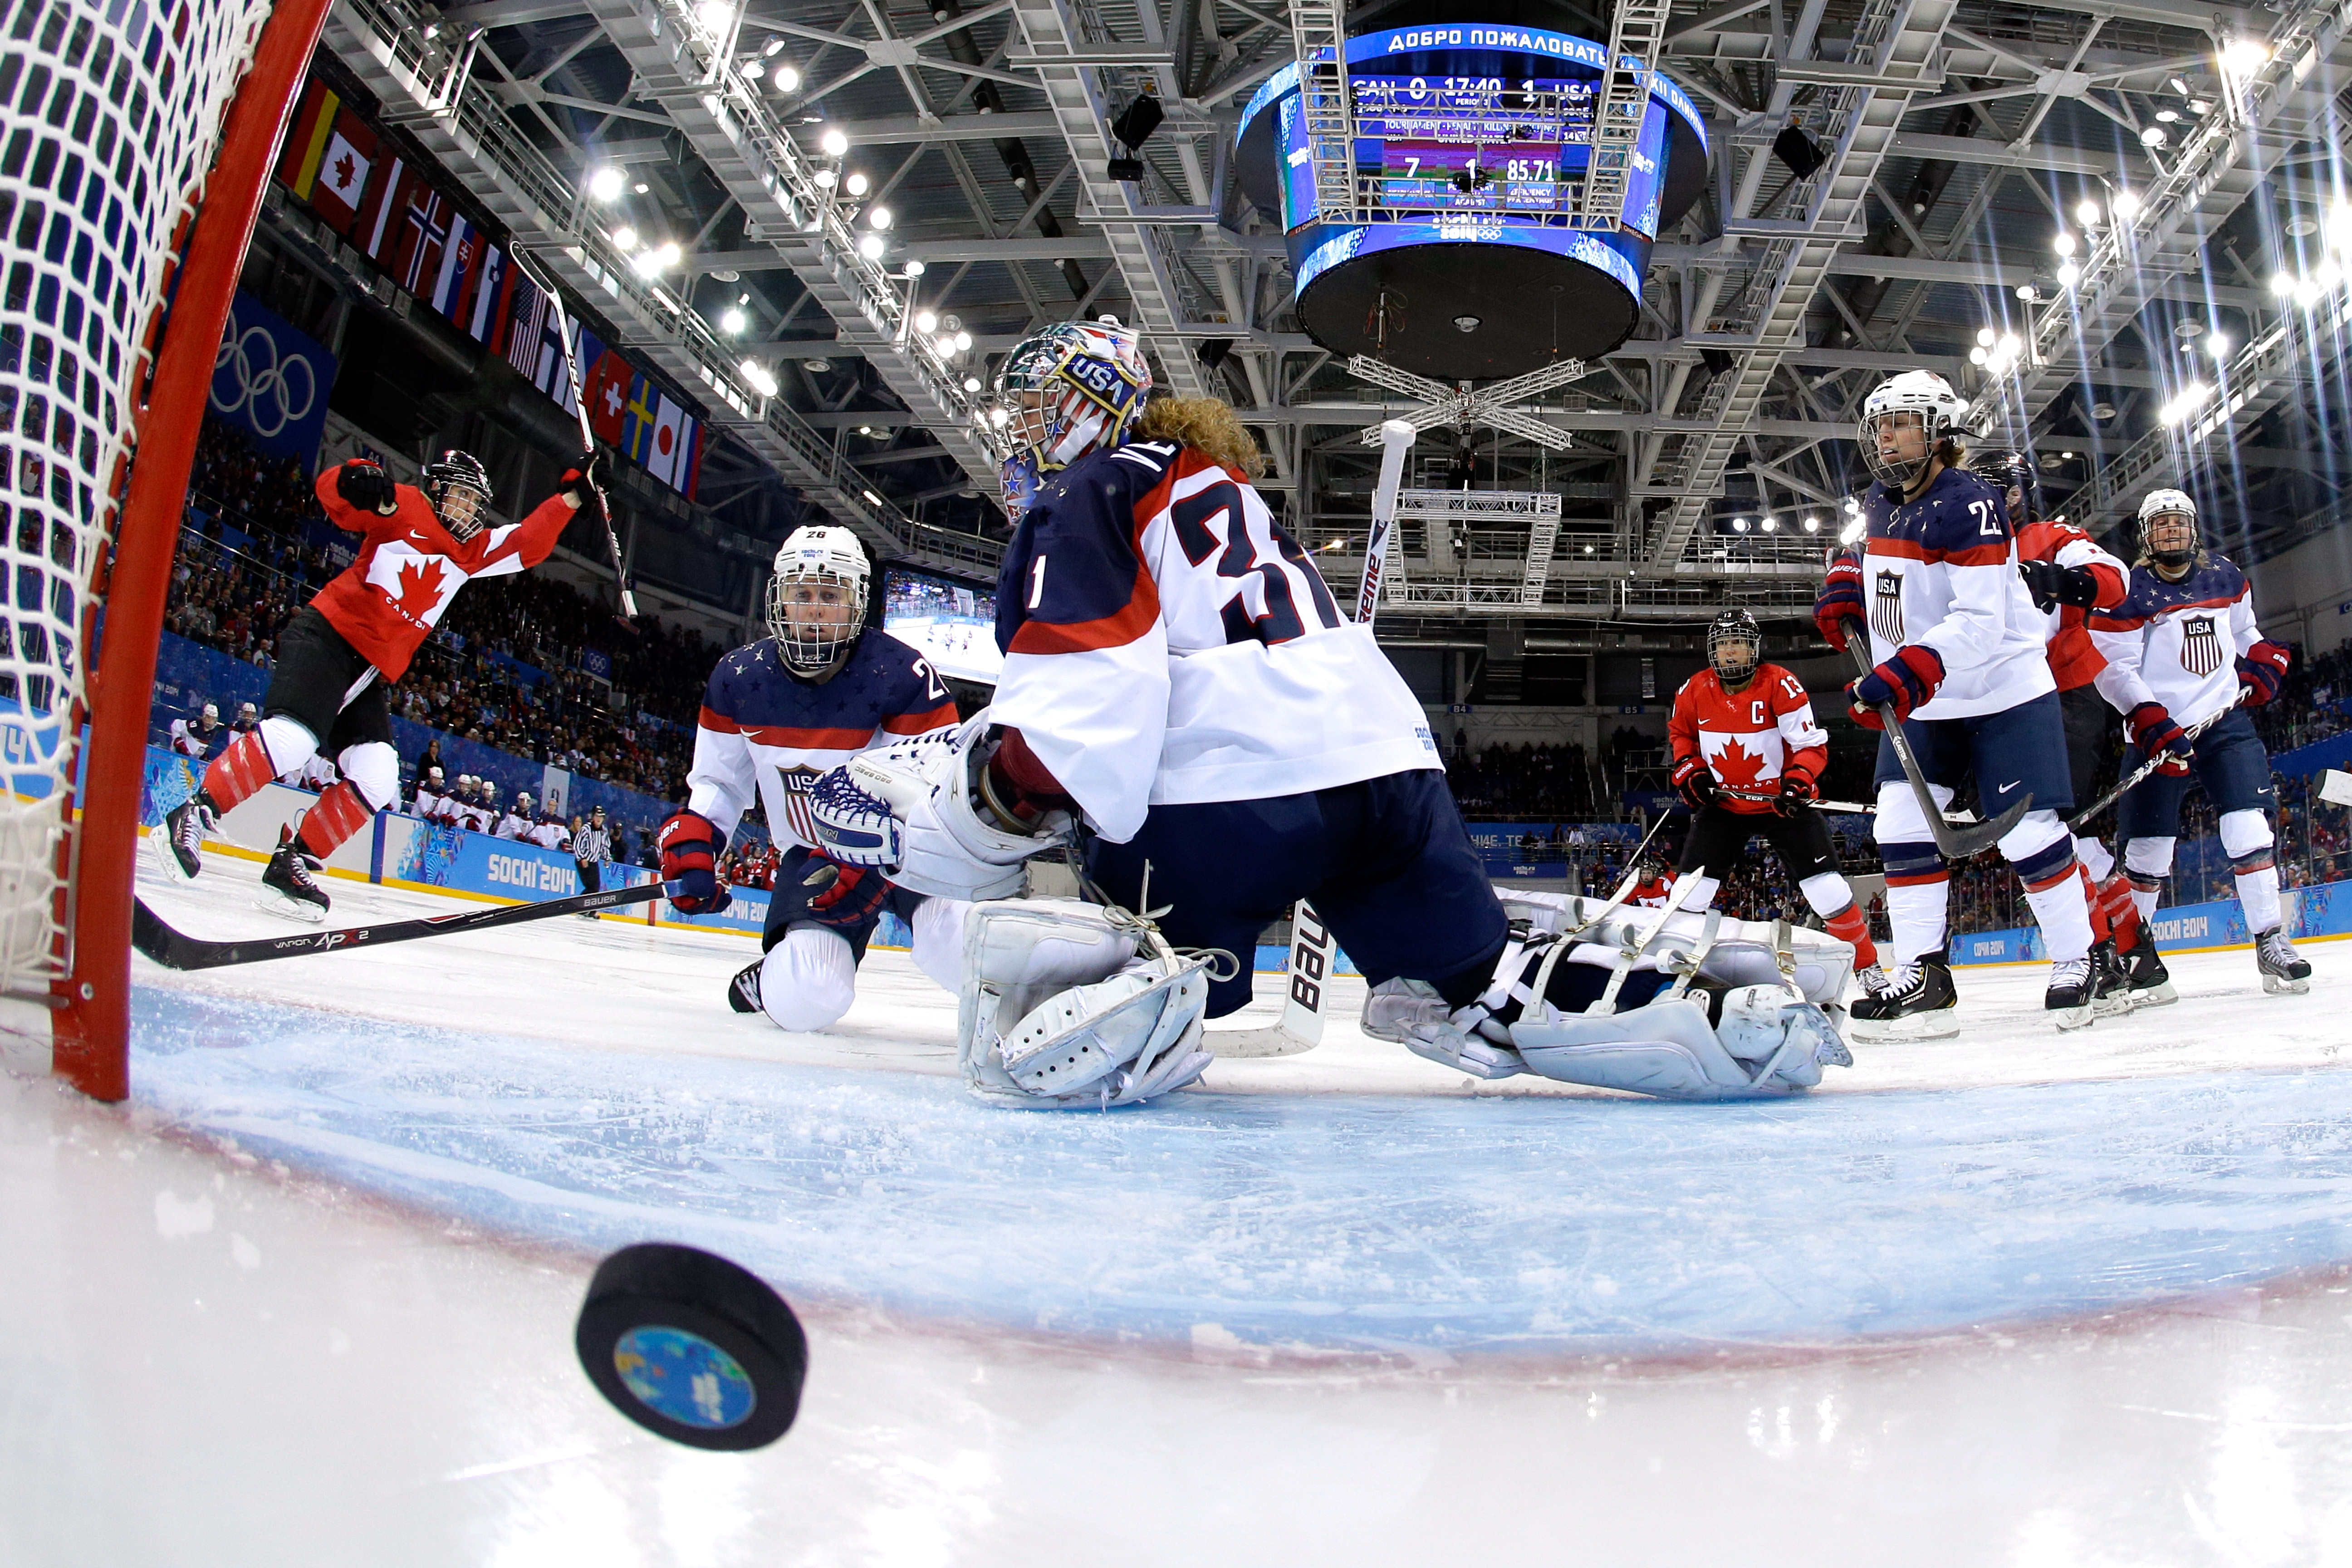 Winter Olympics Hockey Schedule, How To Watch, Channels,